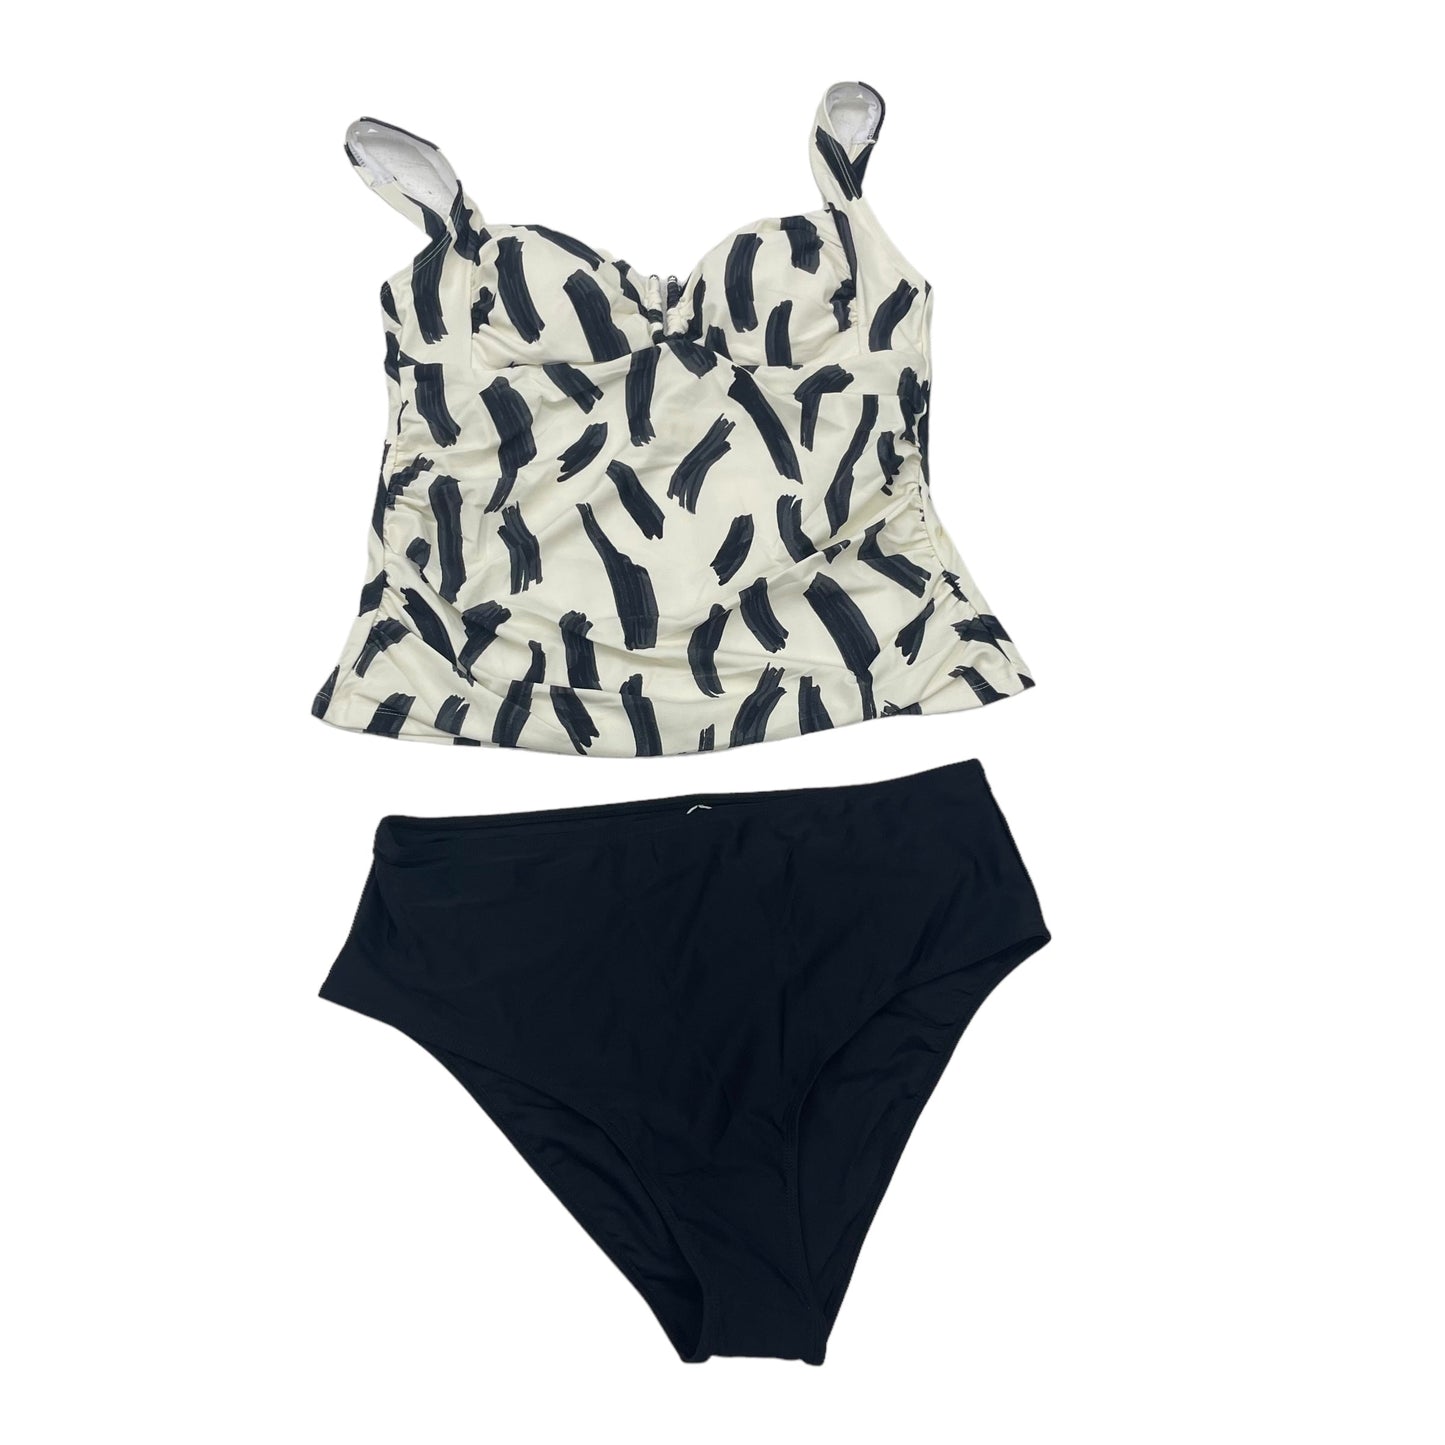 BLACK & WHITE SWIMSUIT 2PC by CUPSHE Size:XL